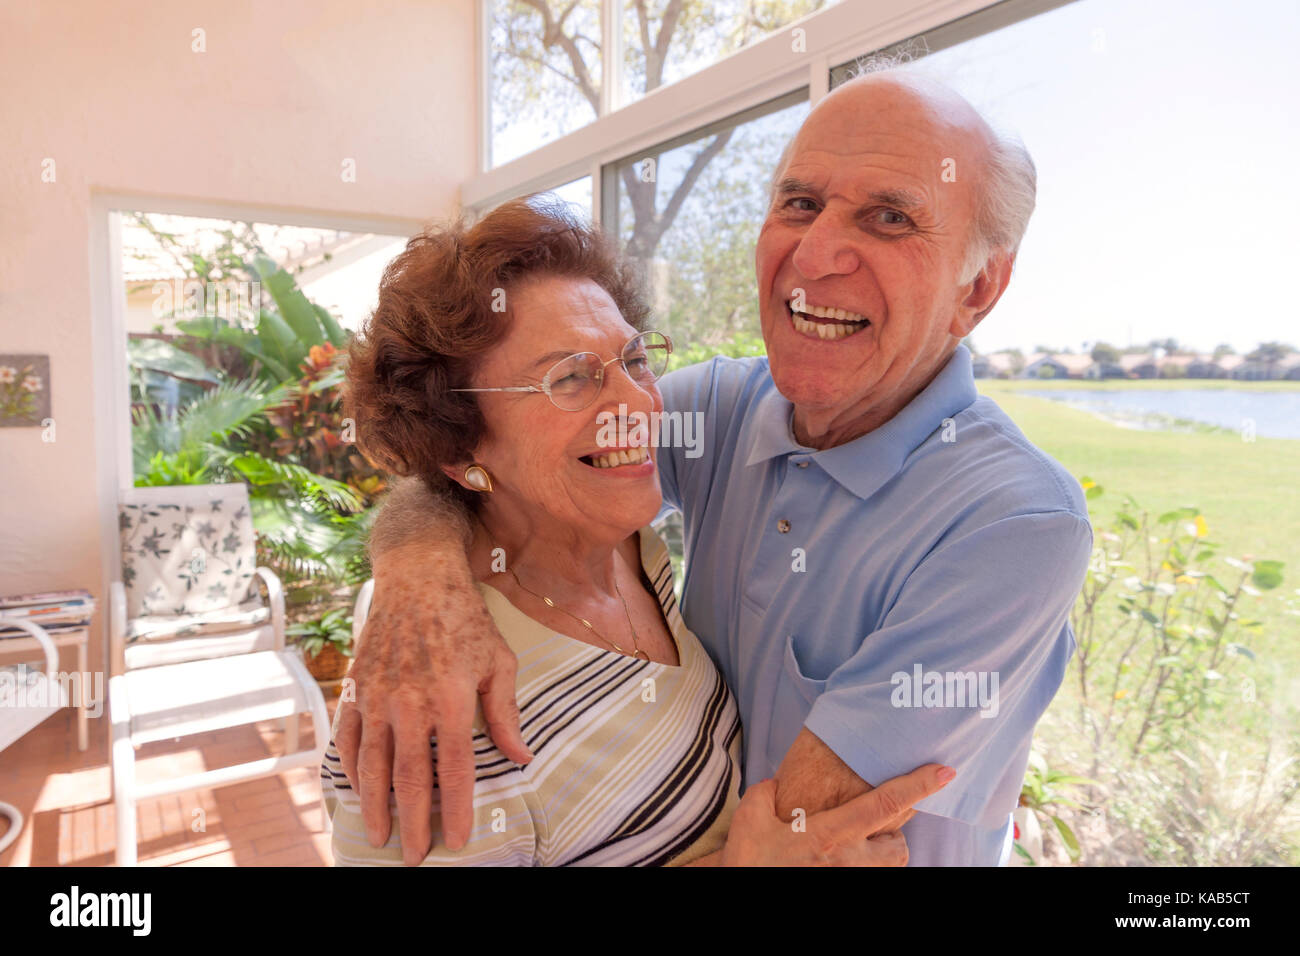 Wife with mild cognitive impairment (87 years-old) & husband (90 years-old), married 65 years, being affectionate & laughing, at home. Stock Photo